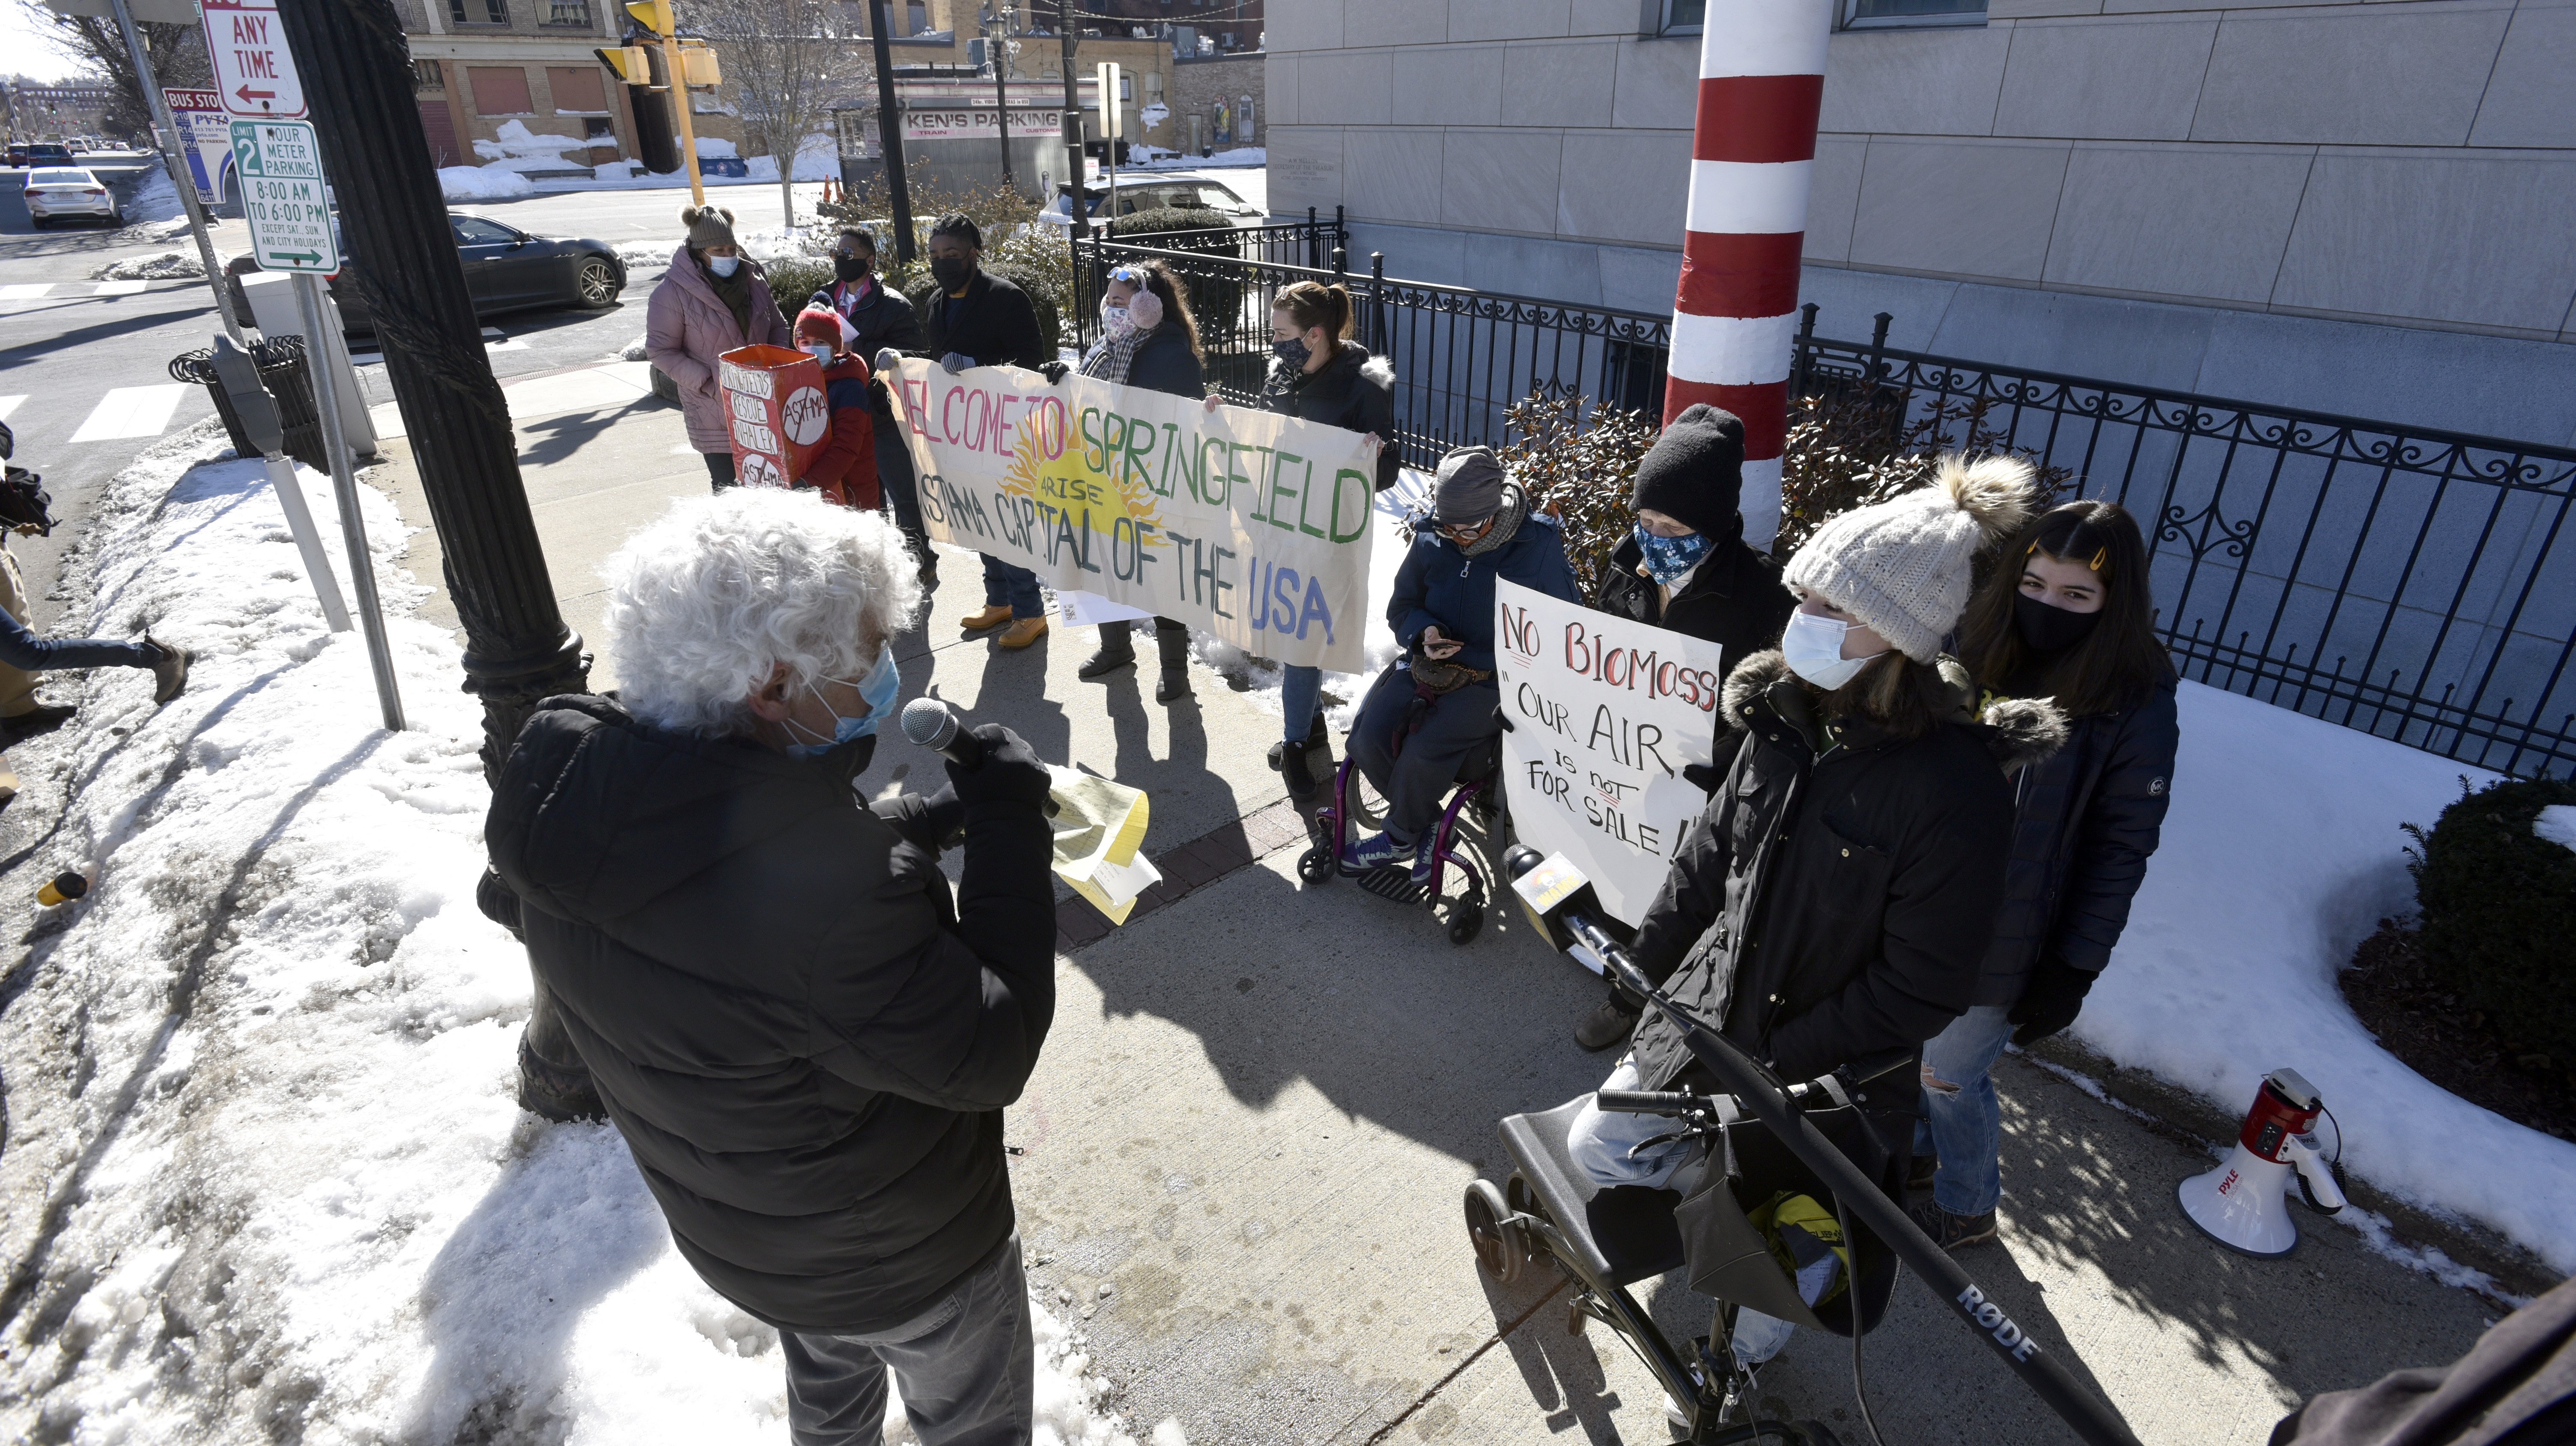 Verne McArthur of the Springfield Climate Justice Coalition speaks during a rally outside the Western Massachusetts office of Governor Charlie Baker in Springfield to demand an end to the long proposed biomass energy plant in East Springfield on Feb. 17, 2021.   (Don Treeger / The Republican)